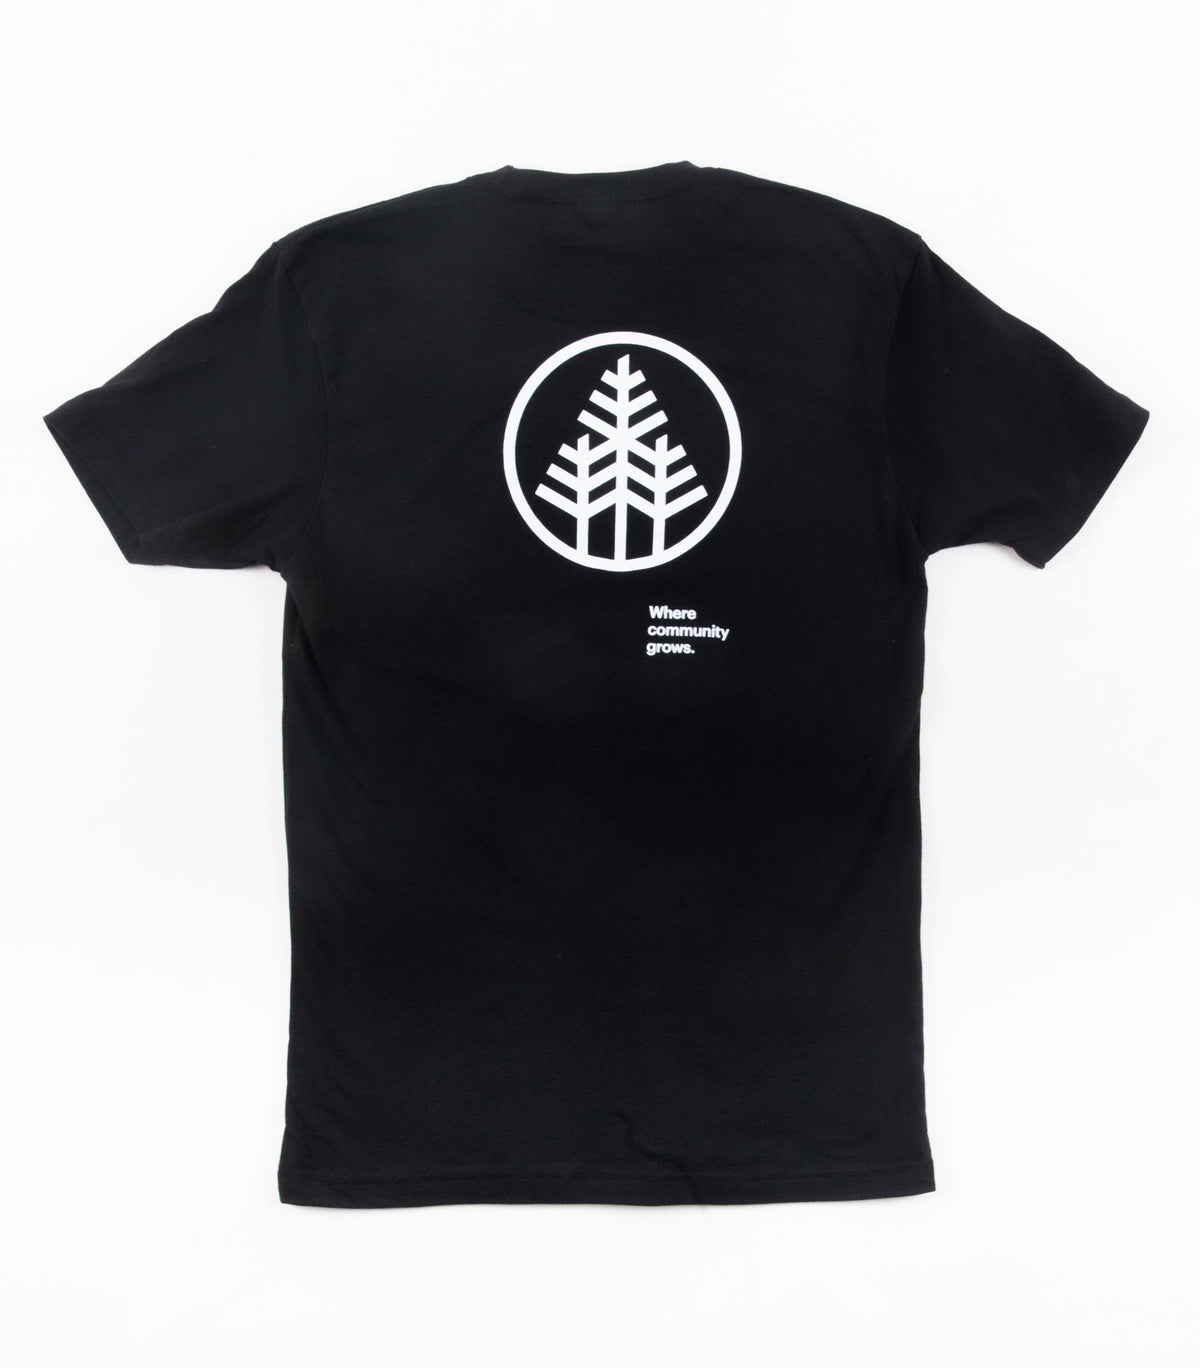 Black T Shirt with Tree Stamp; Where Community Grows